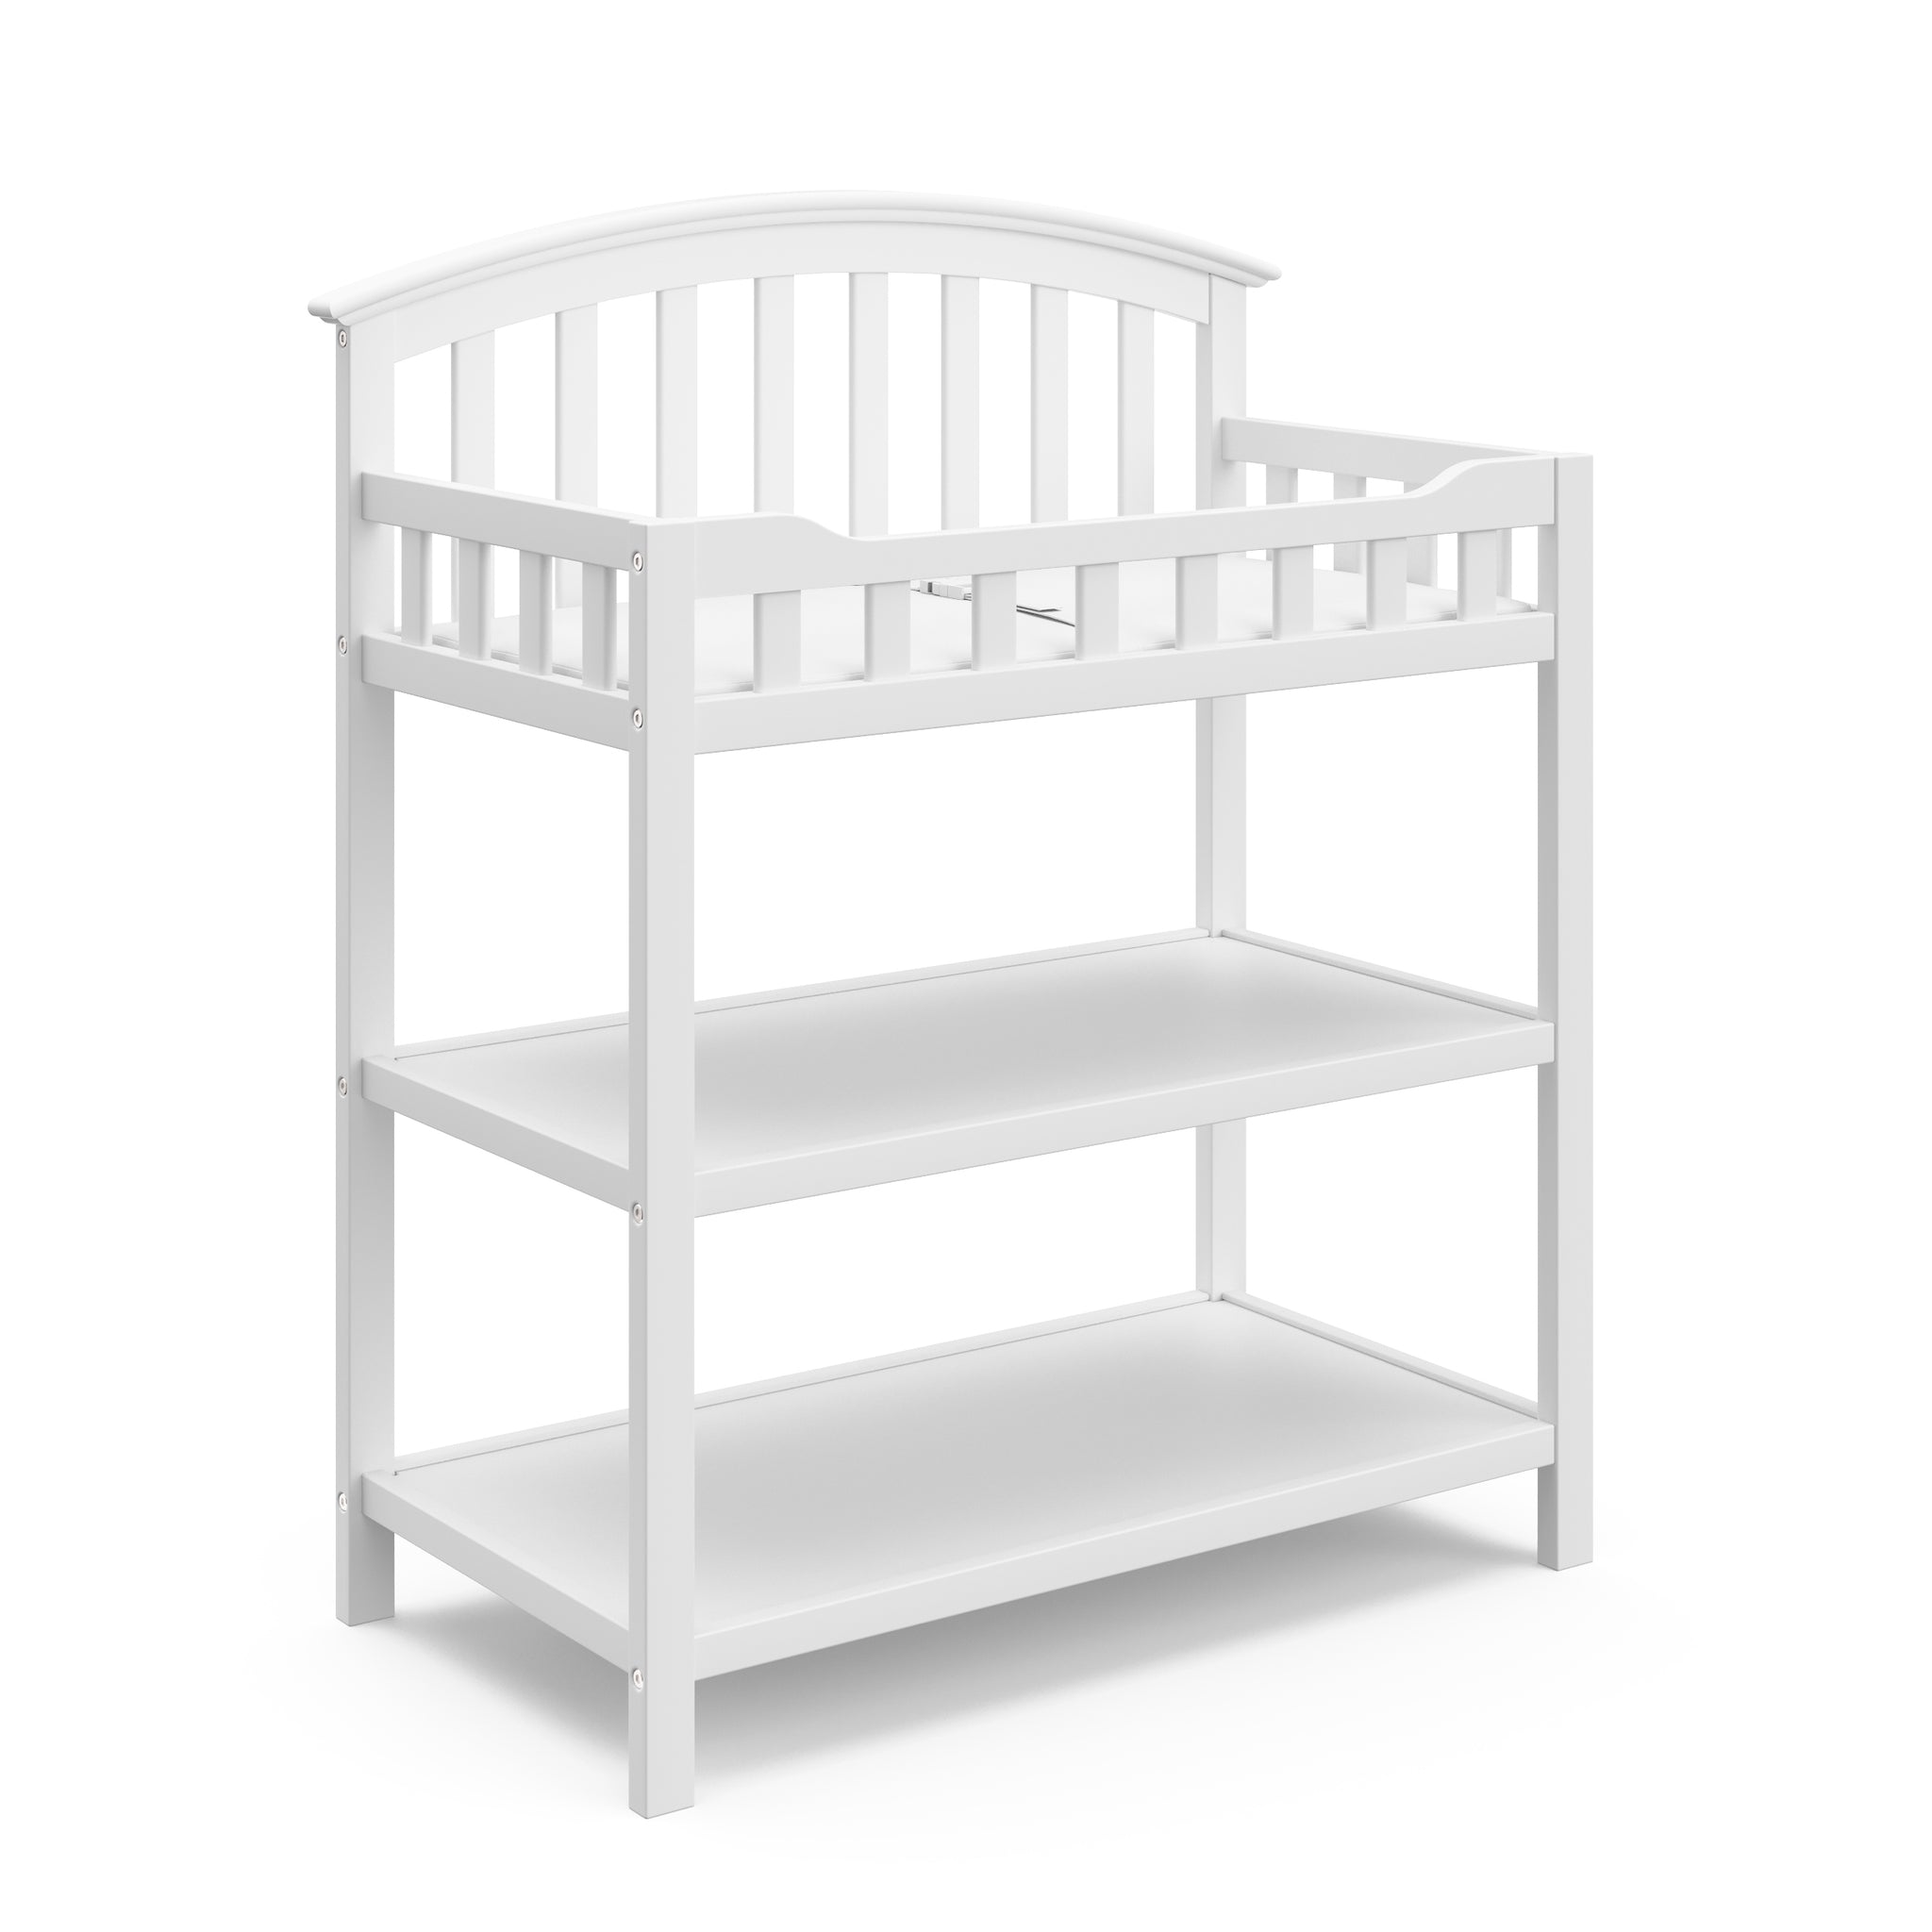 White angled changing table with two open shelves